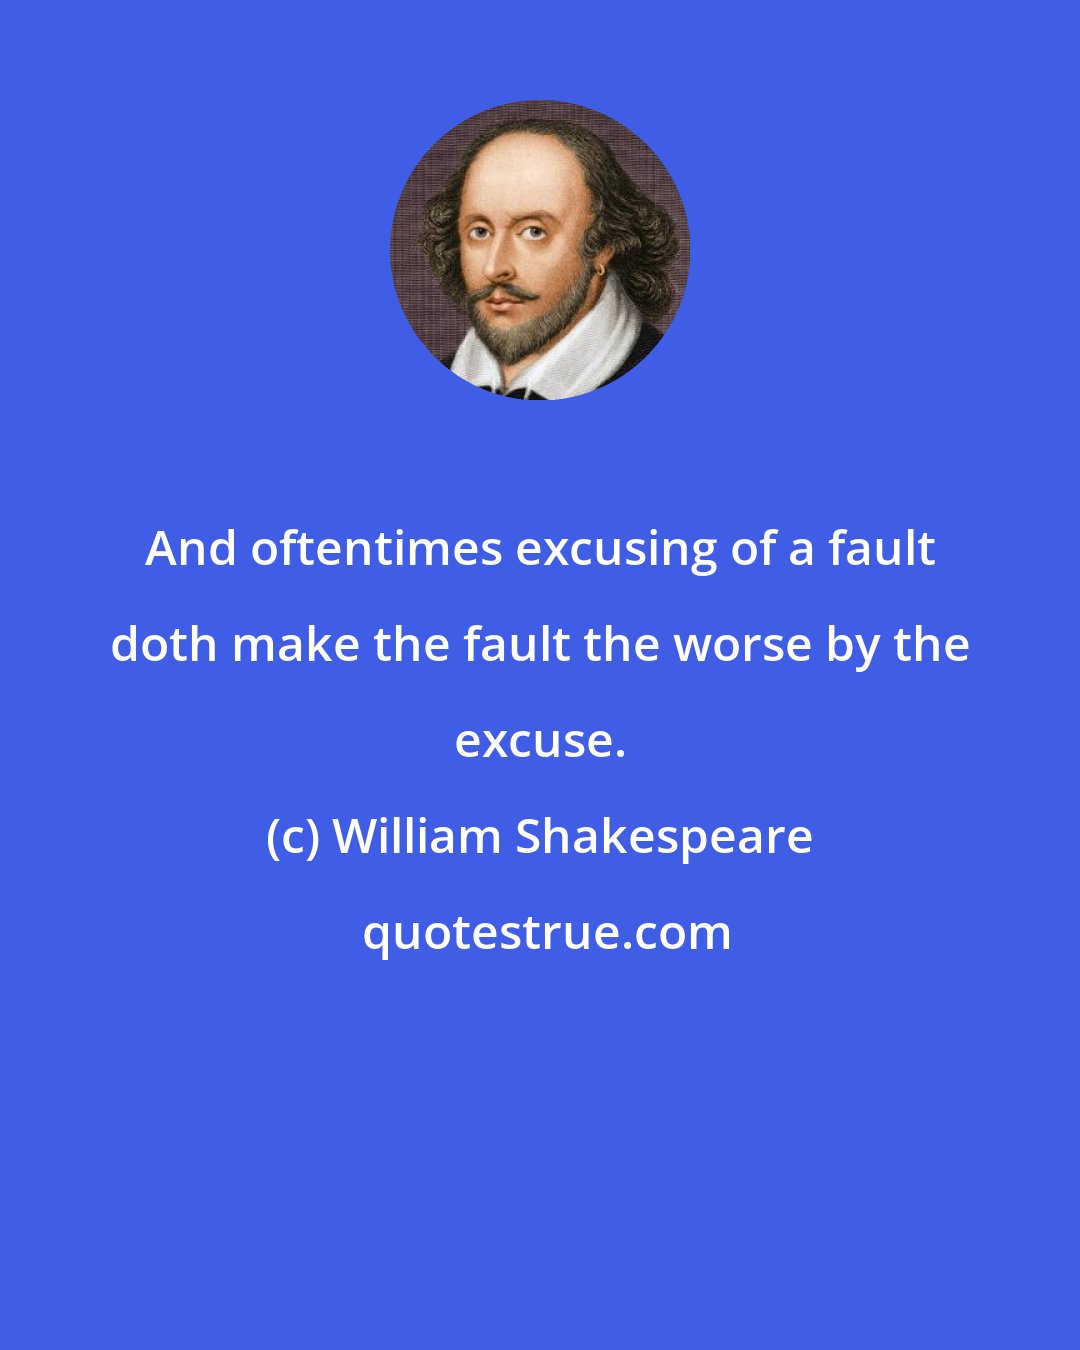 William Shakespeare: And oftentimes excusing of a fault doth make the fault the worse by the excuse.